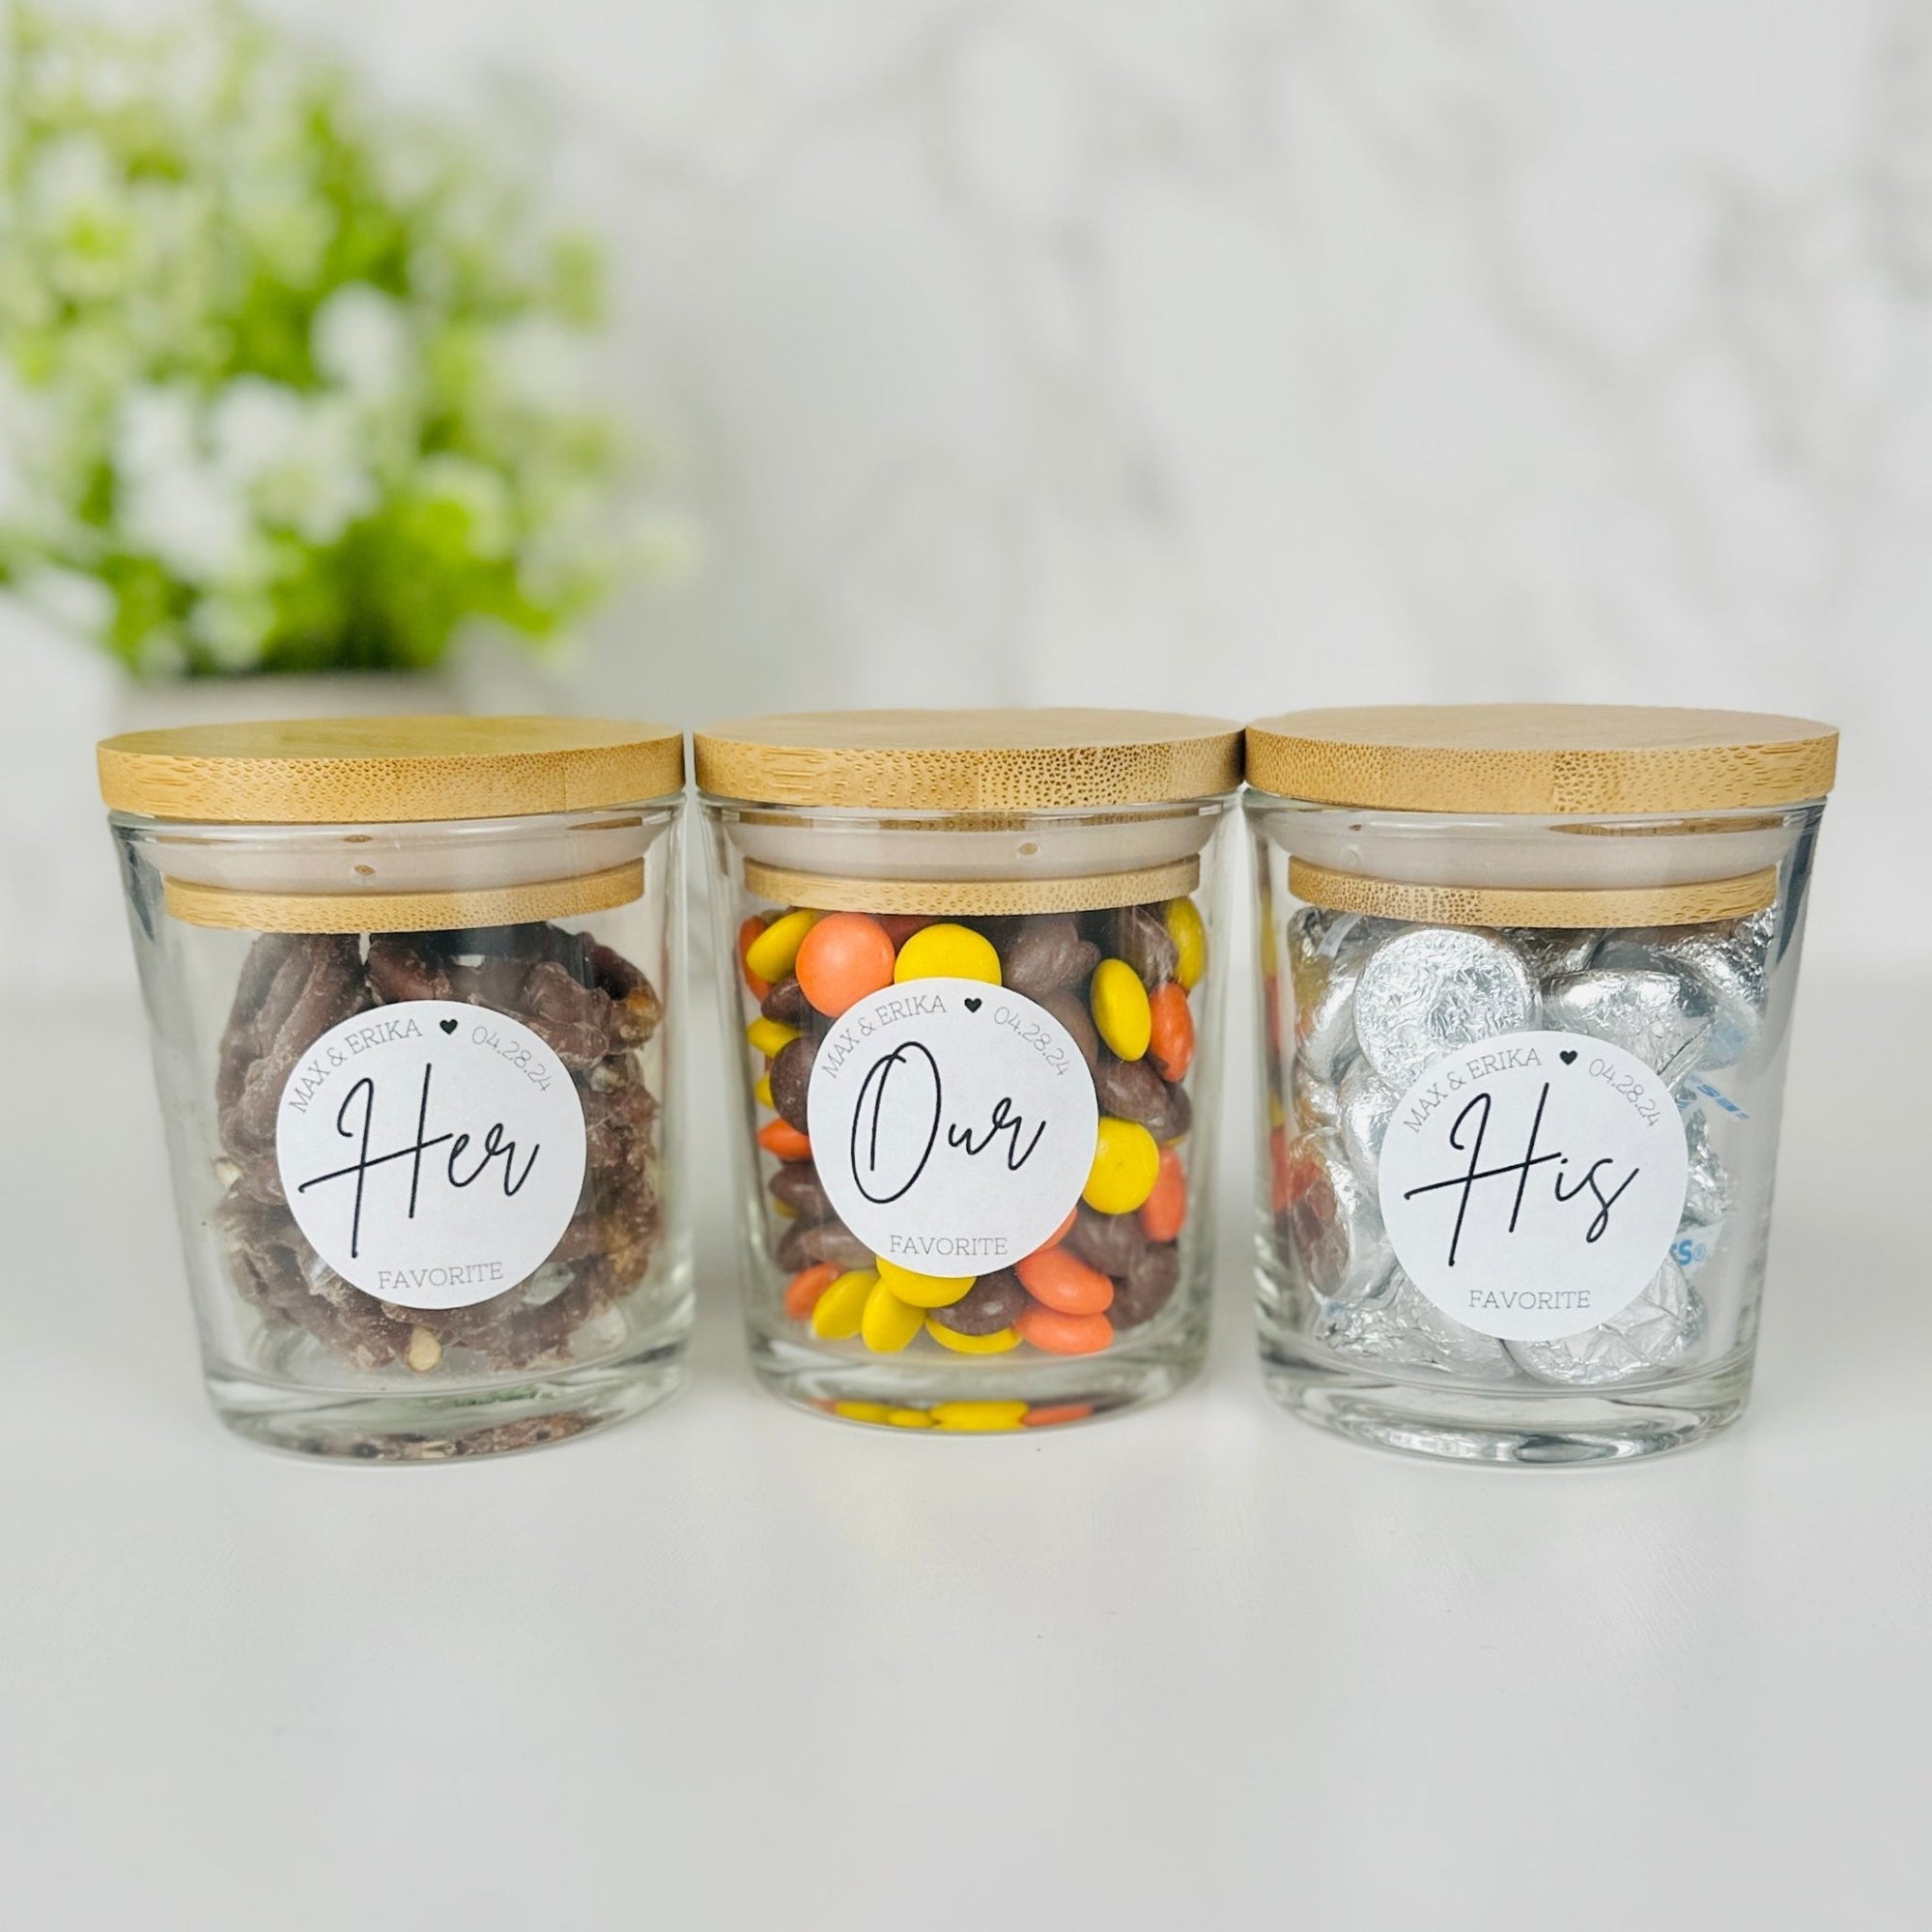 His & Hers Mason Jar - Forever Wedding Favors